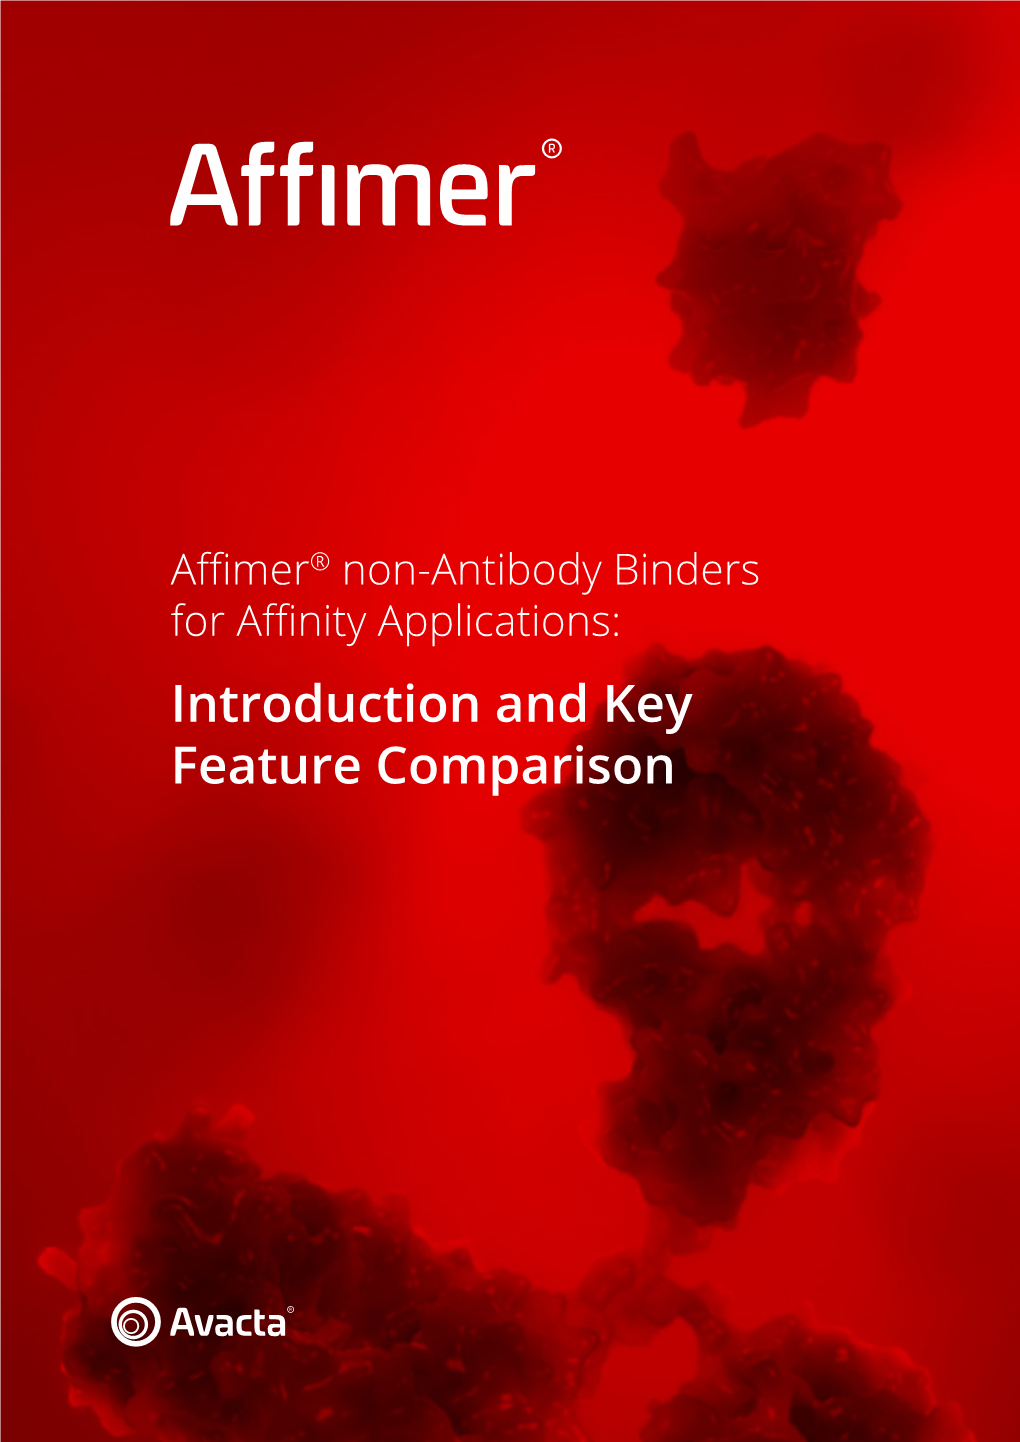 Affimers: from Discovery to Drug Delivery